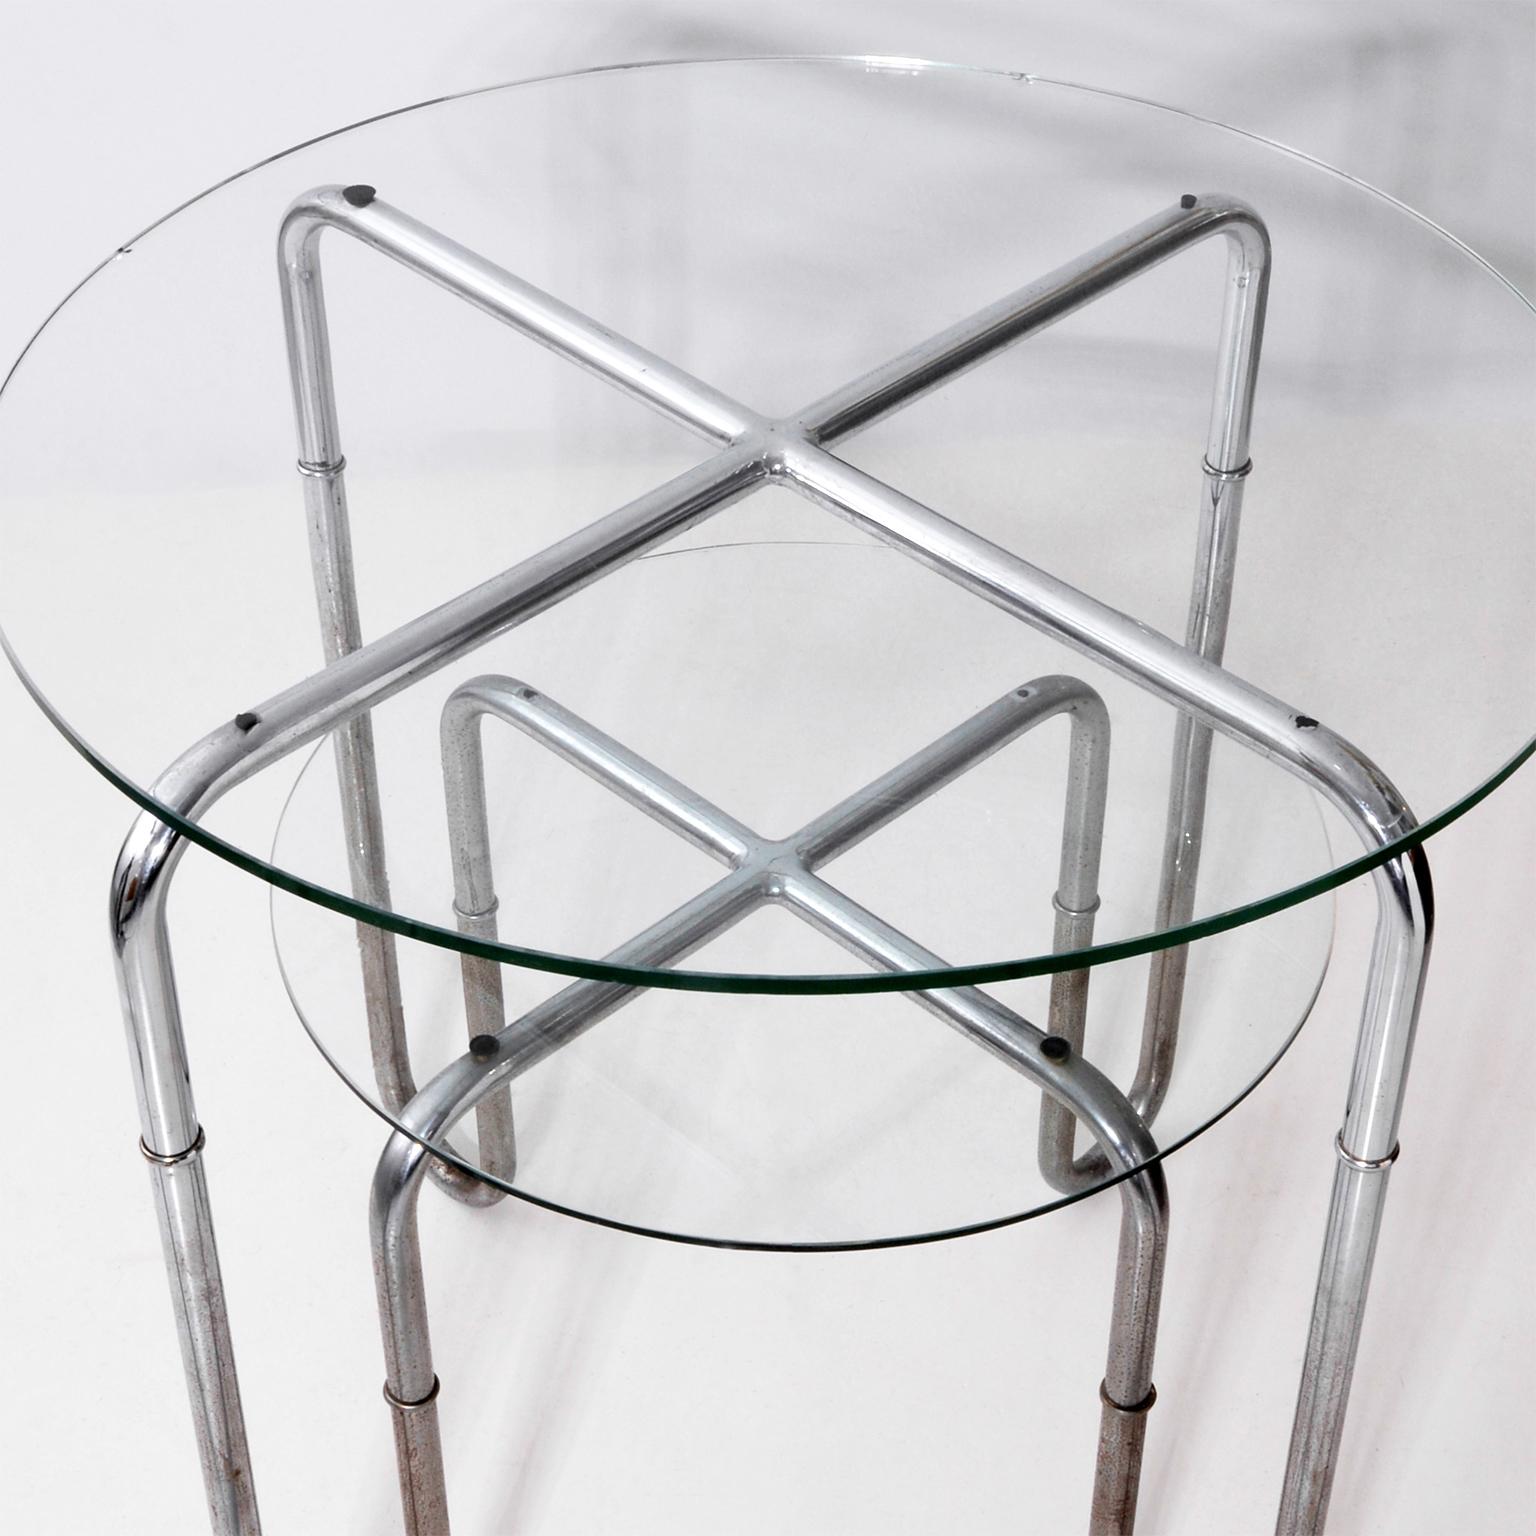 Mid-20th Century Bauhaus Steel and Glass Round Table by Josef & Leopold Quittner, Vienna, c. 1930 For Sale